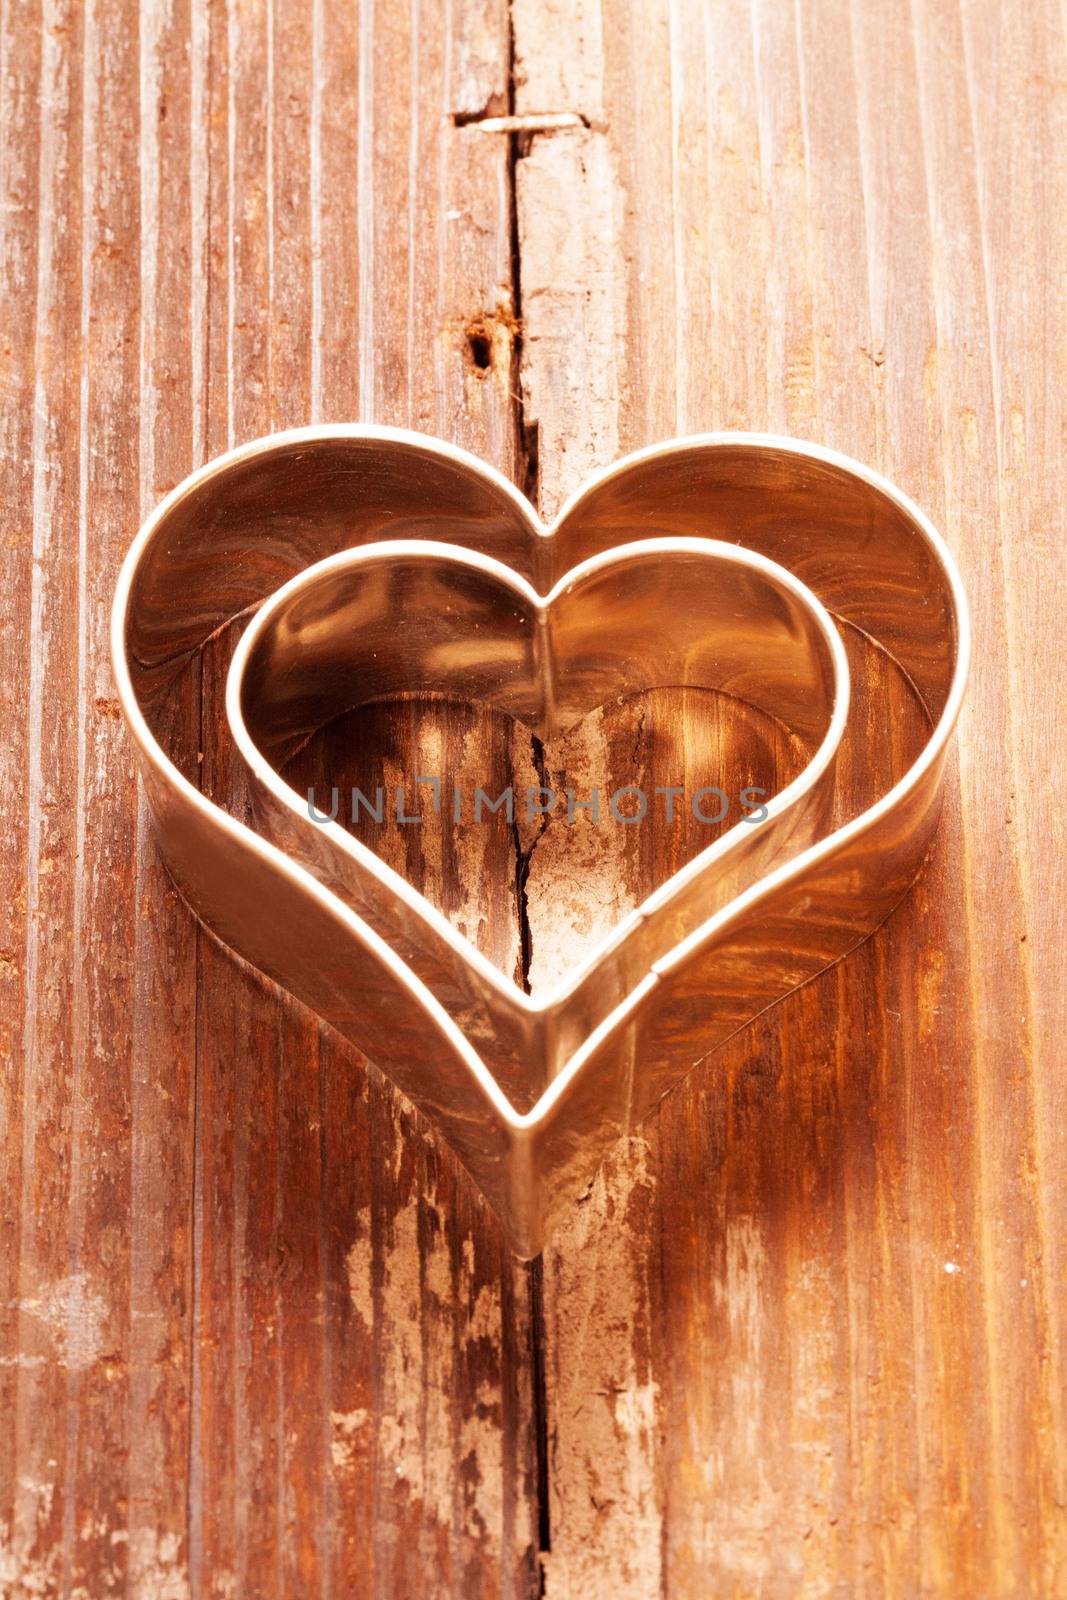 Cookies cutter heart on wood by Bestpictures